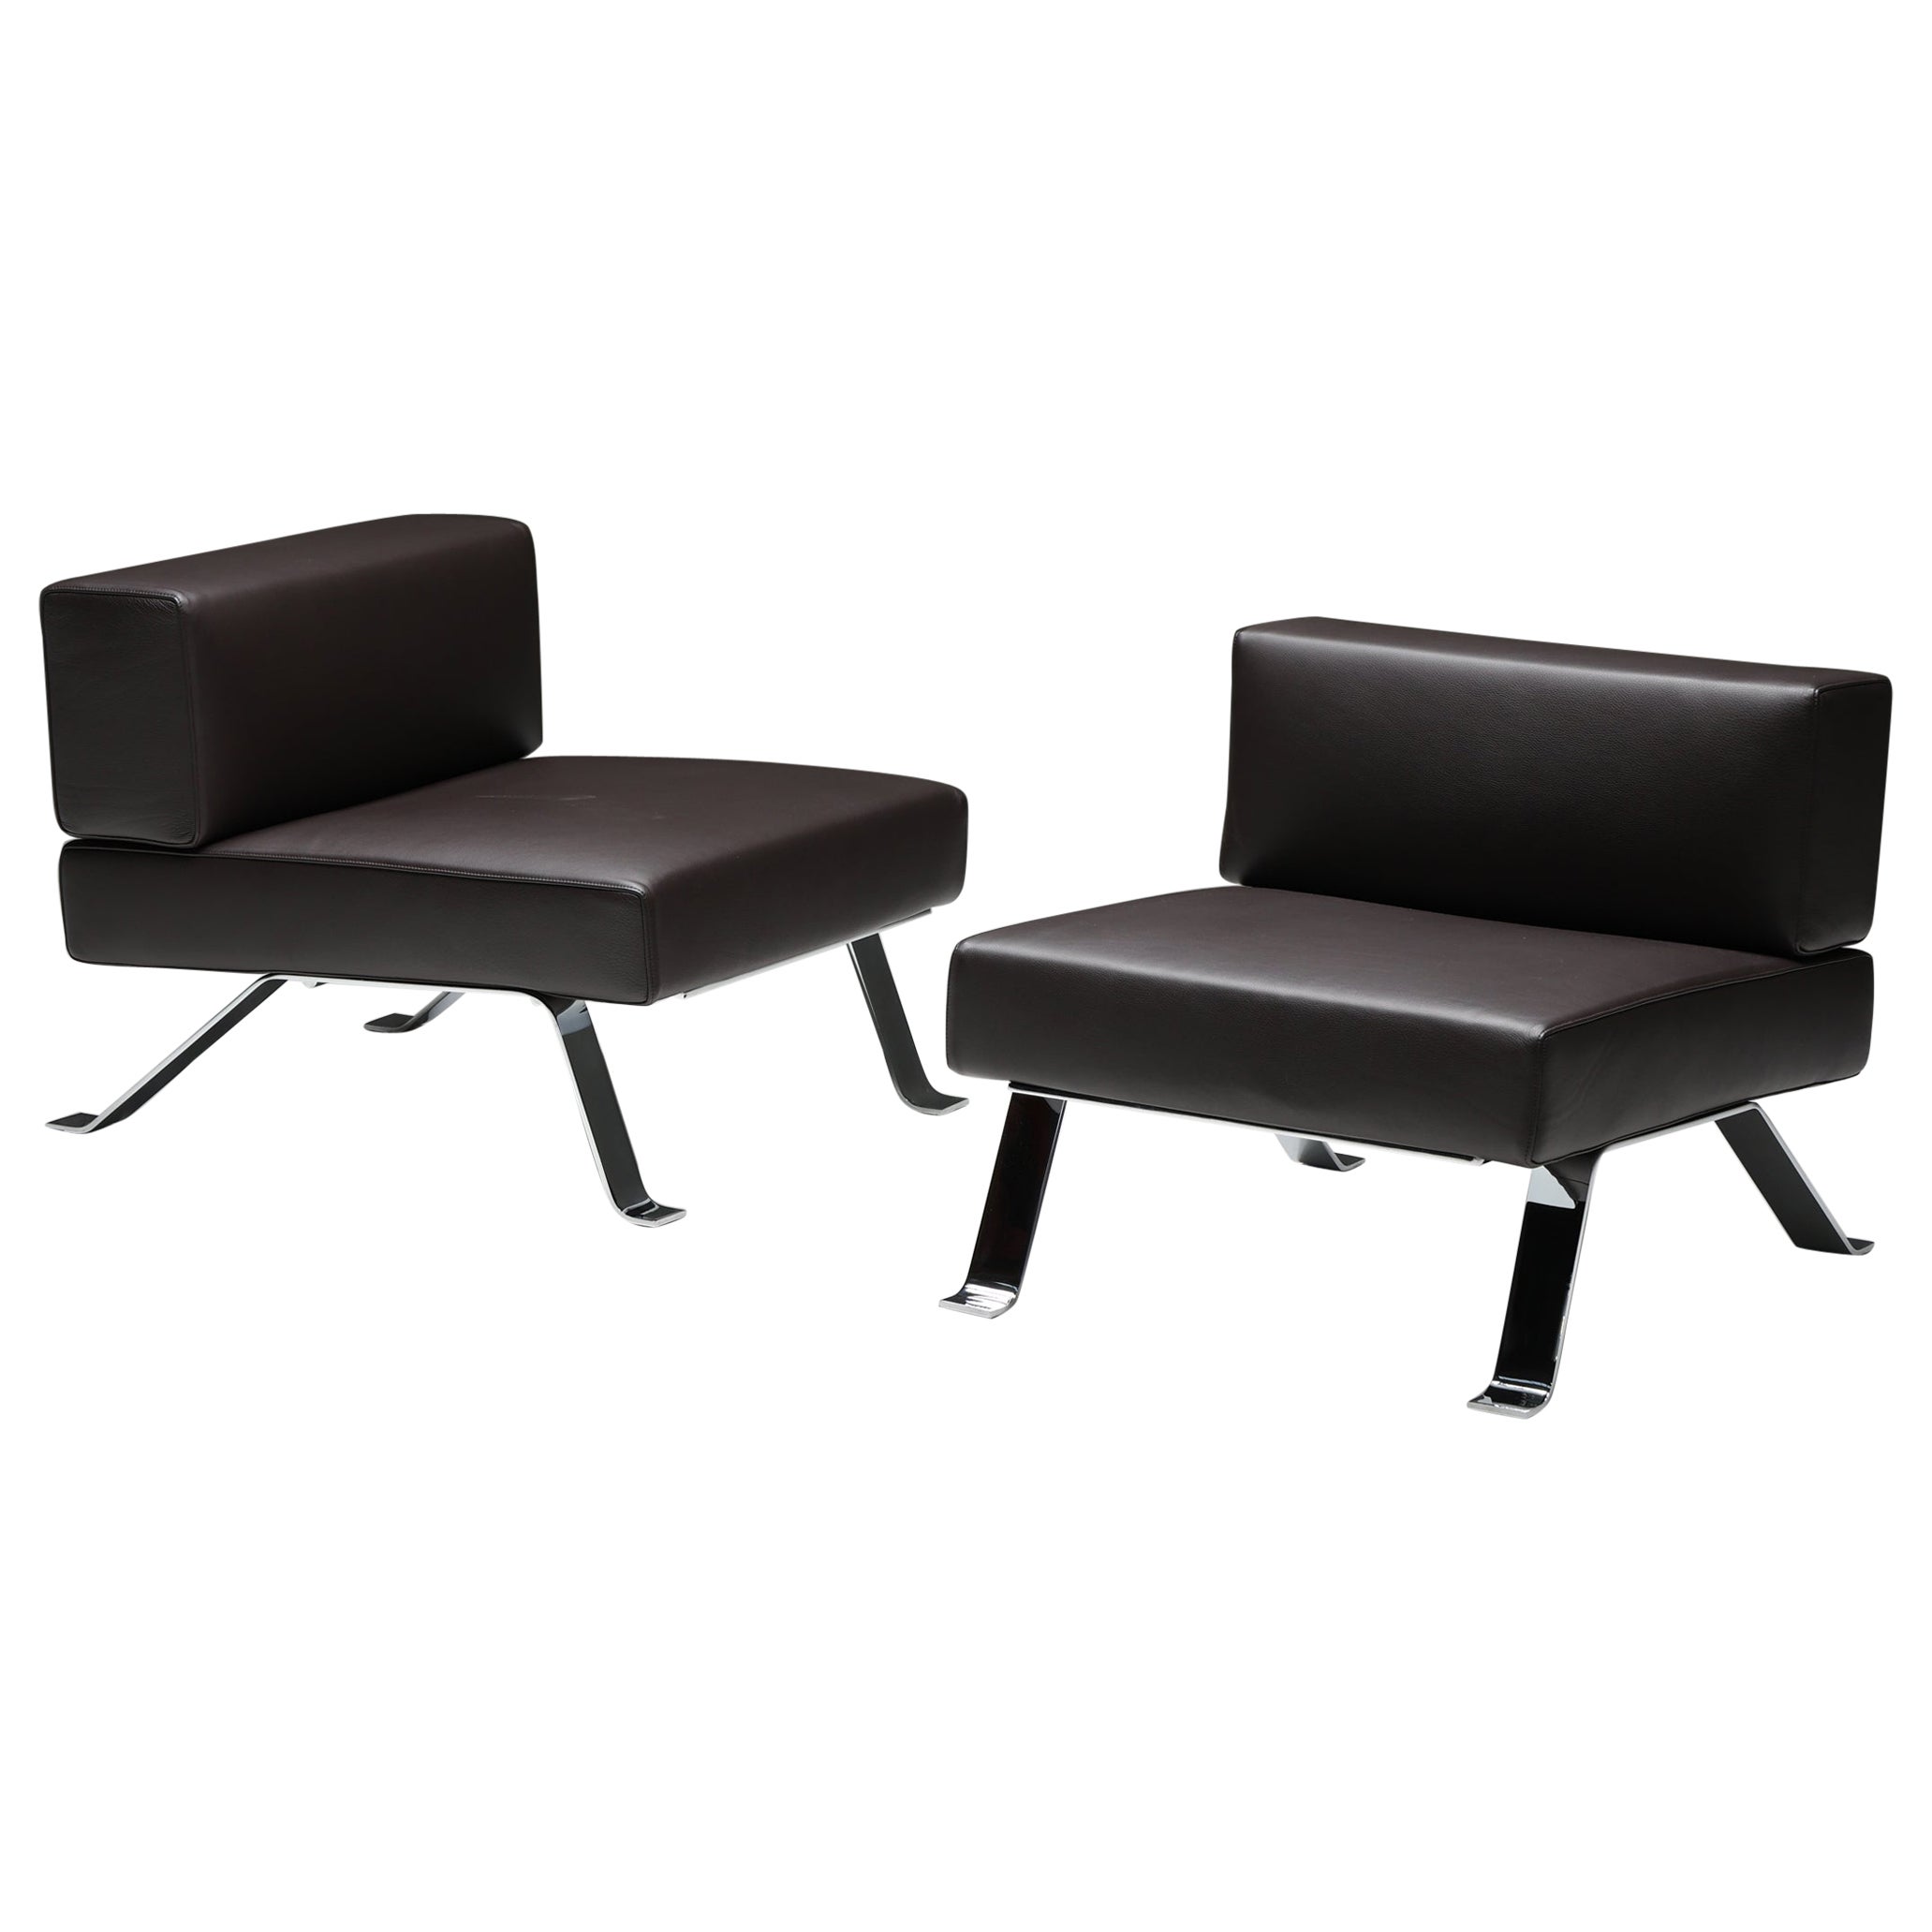 Charlotte Perriand Ombra Lounge Chair pour Cassina, Italie, 2004 en vente